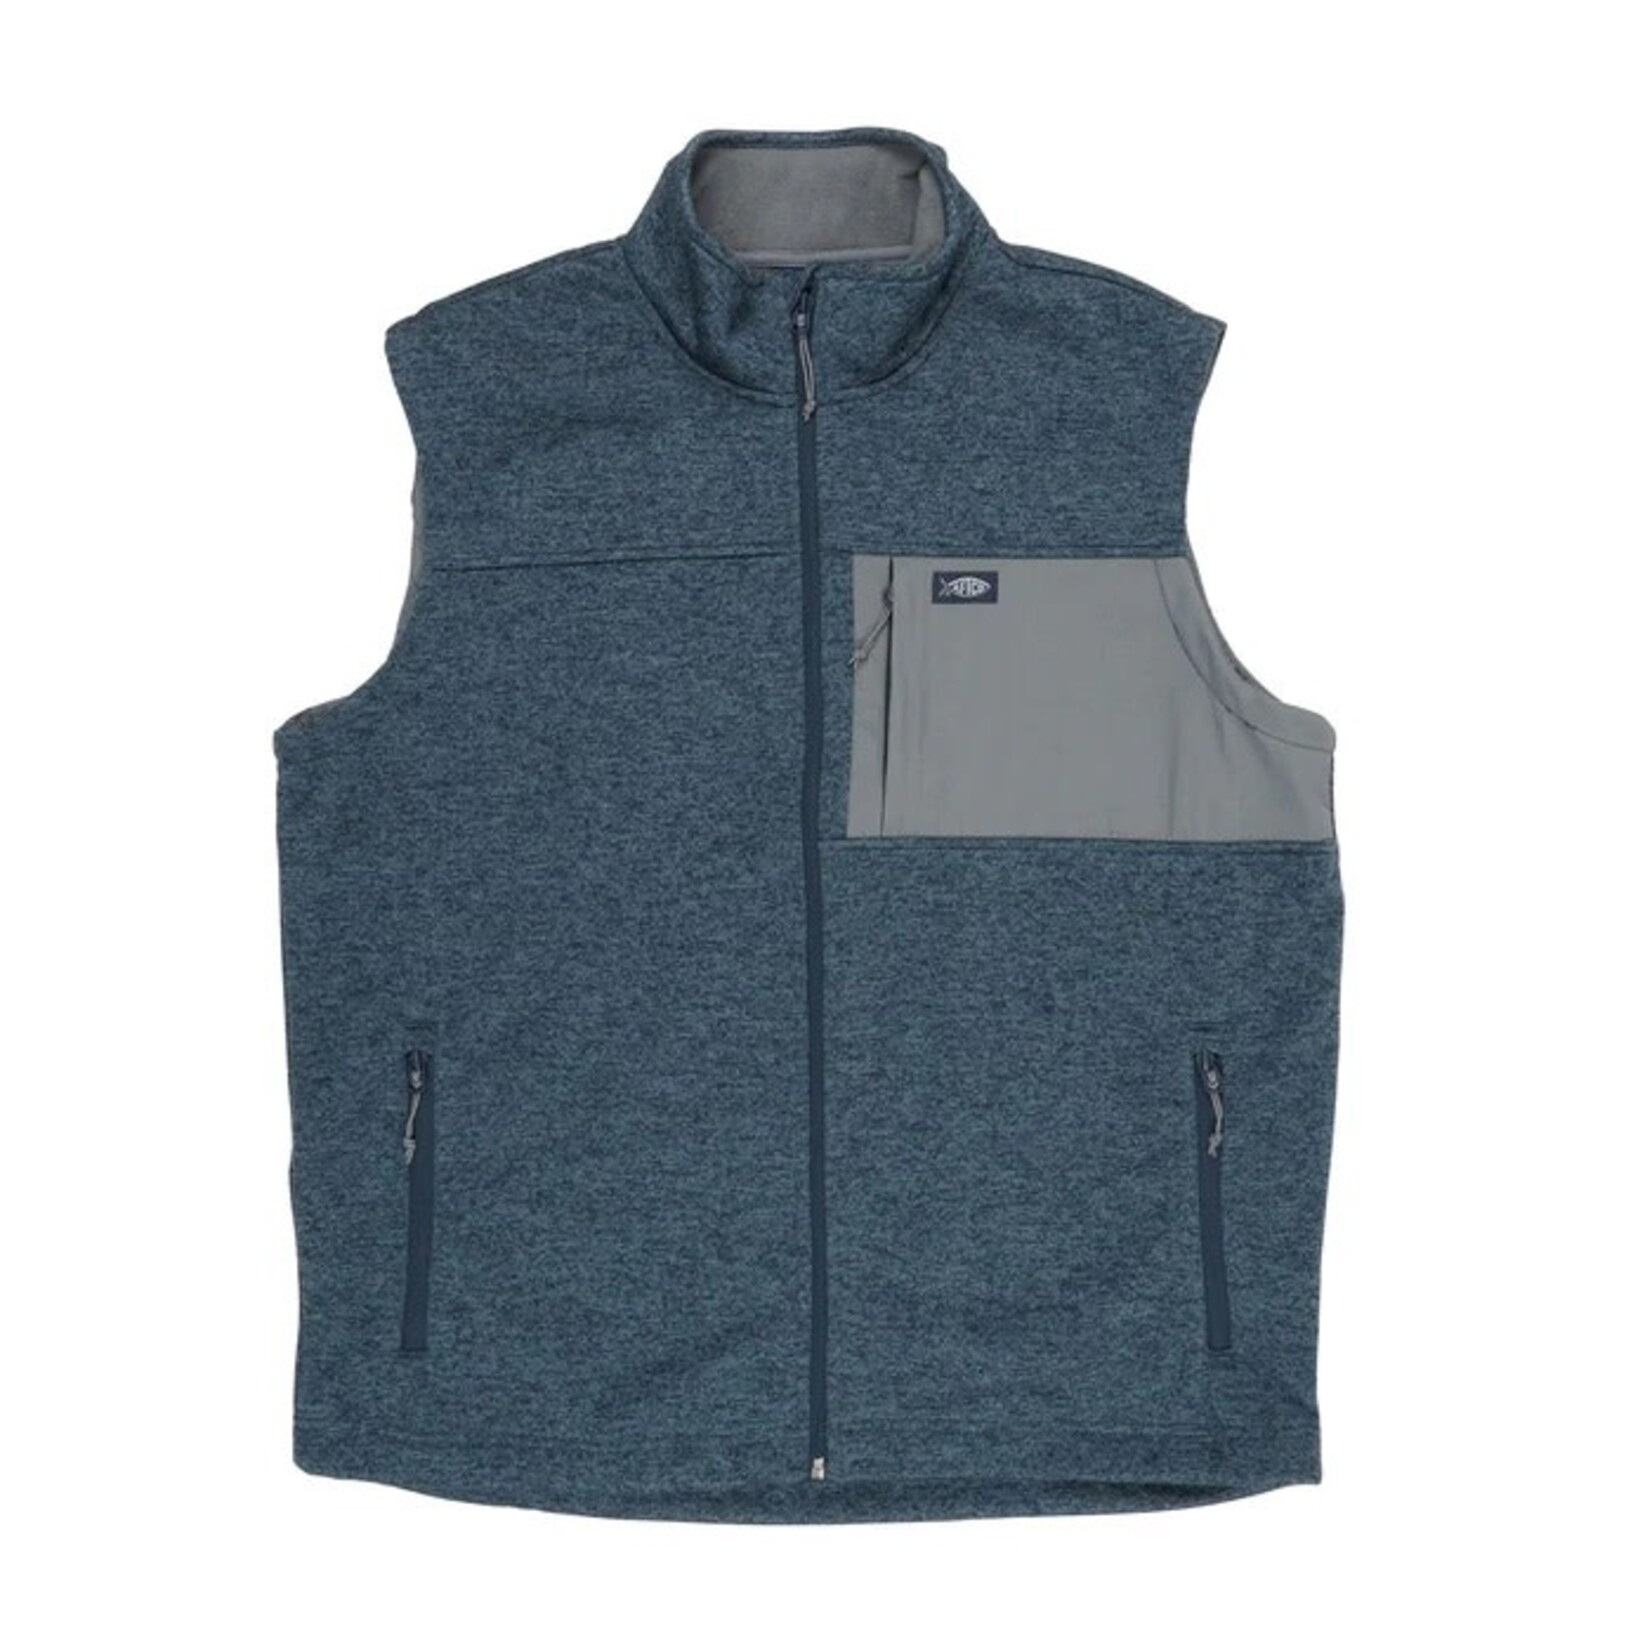 AFTCO Ripcord Softshell Vest